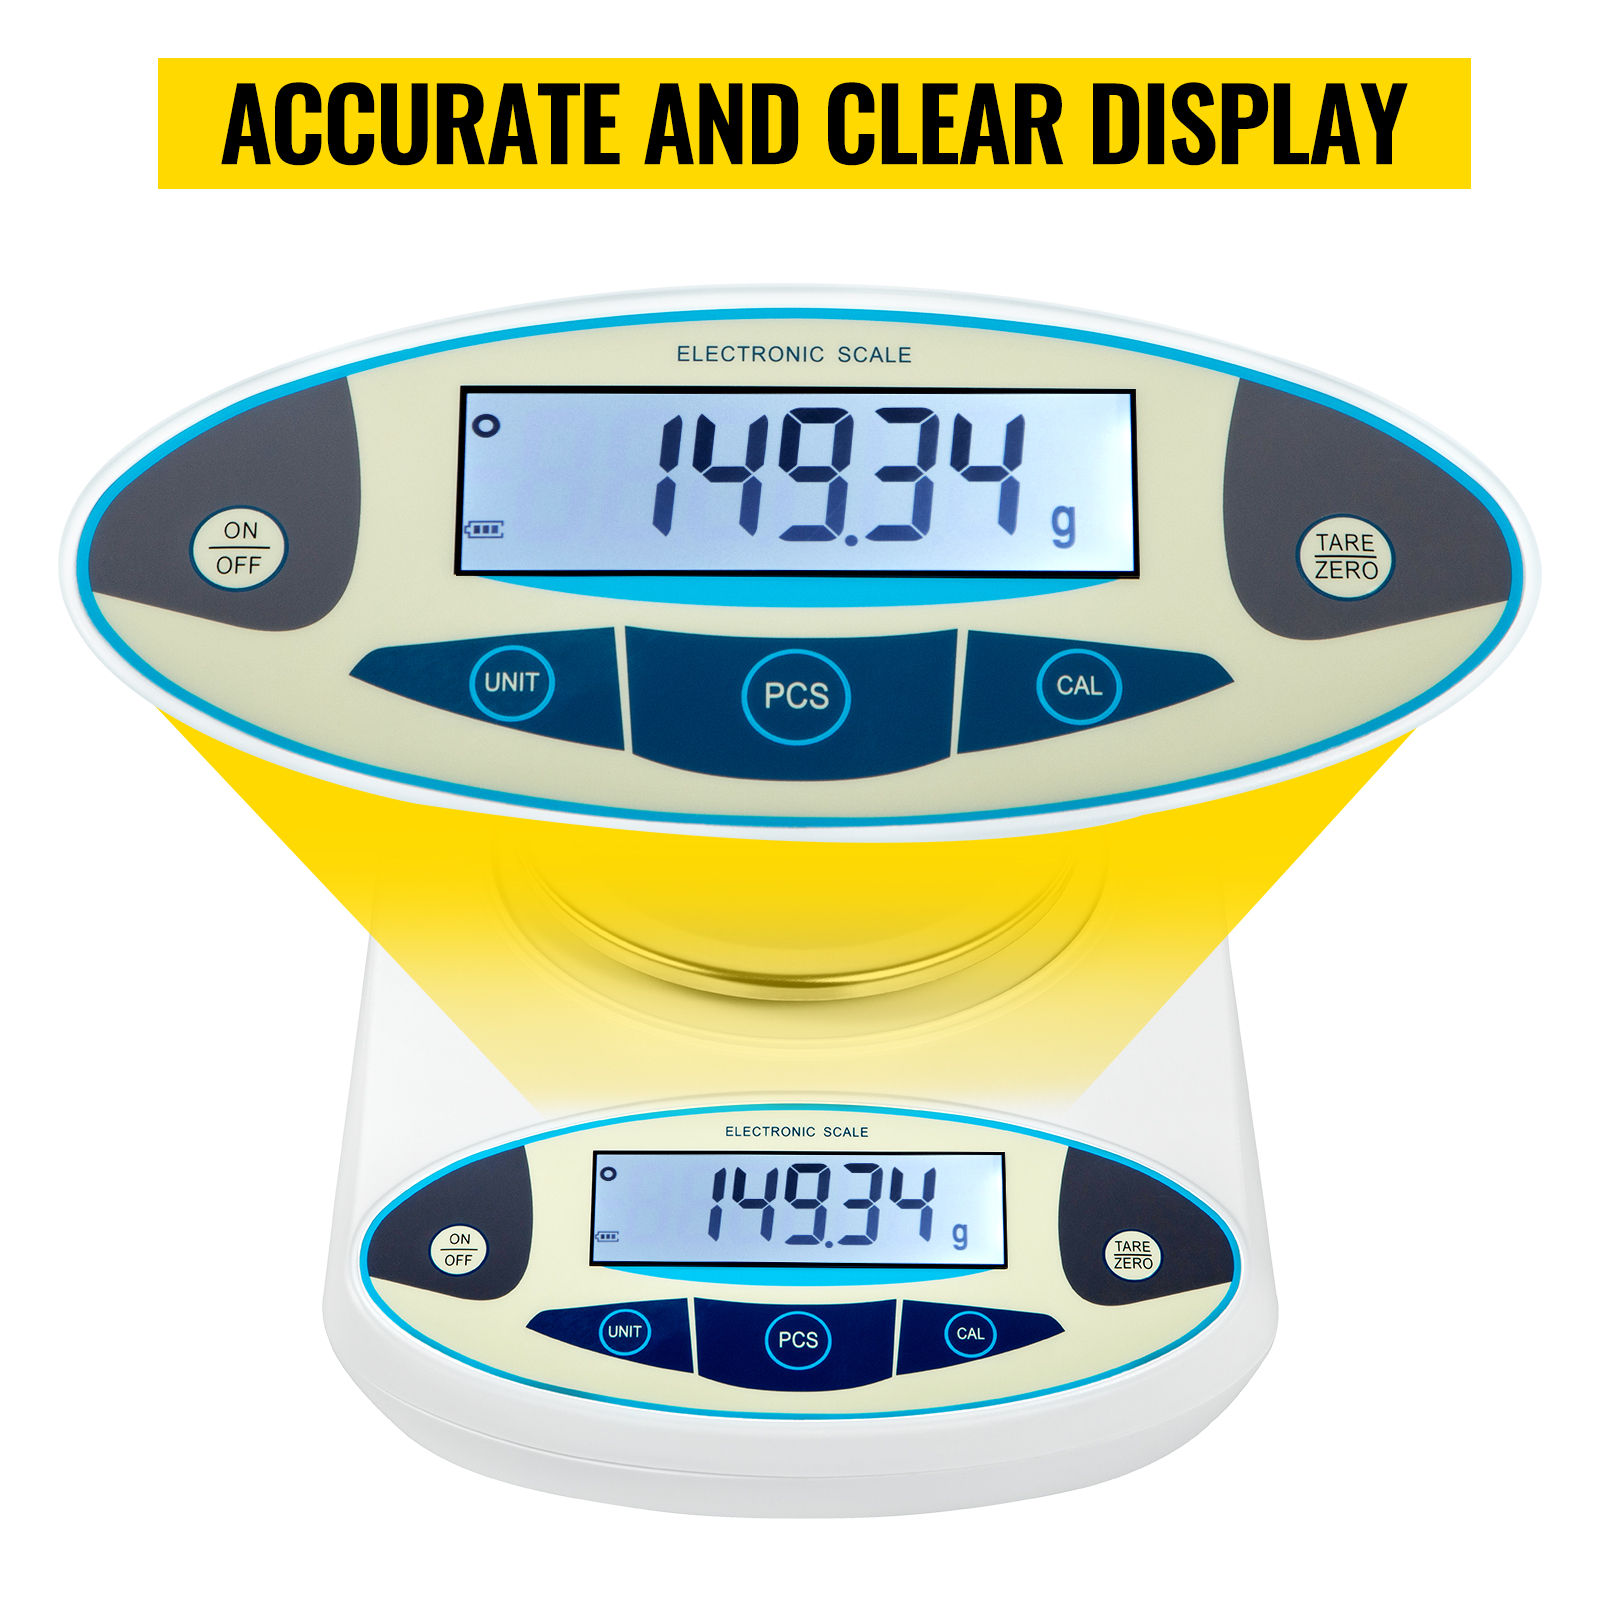 https://d2qc09rl1gfuof.cloudfront.net/product/FXTPMC3000G20TVVR/analytical-balance-m100-5.jpg